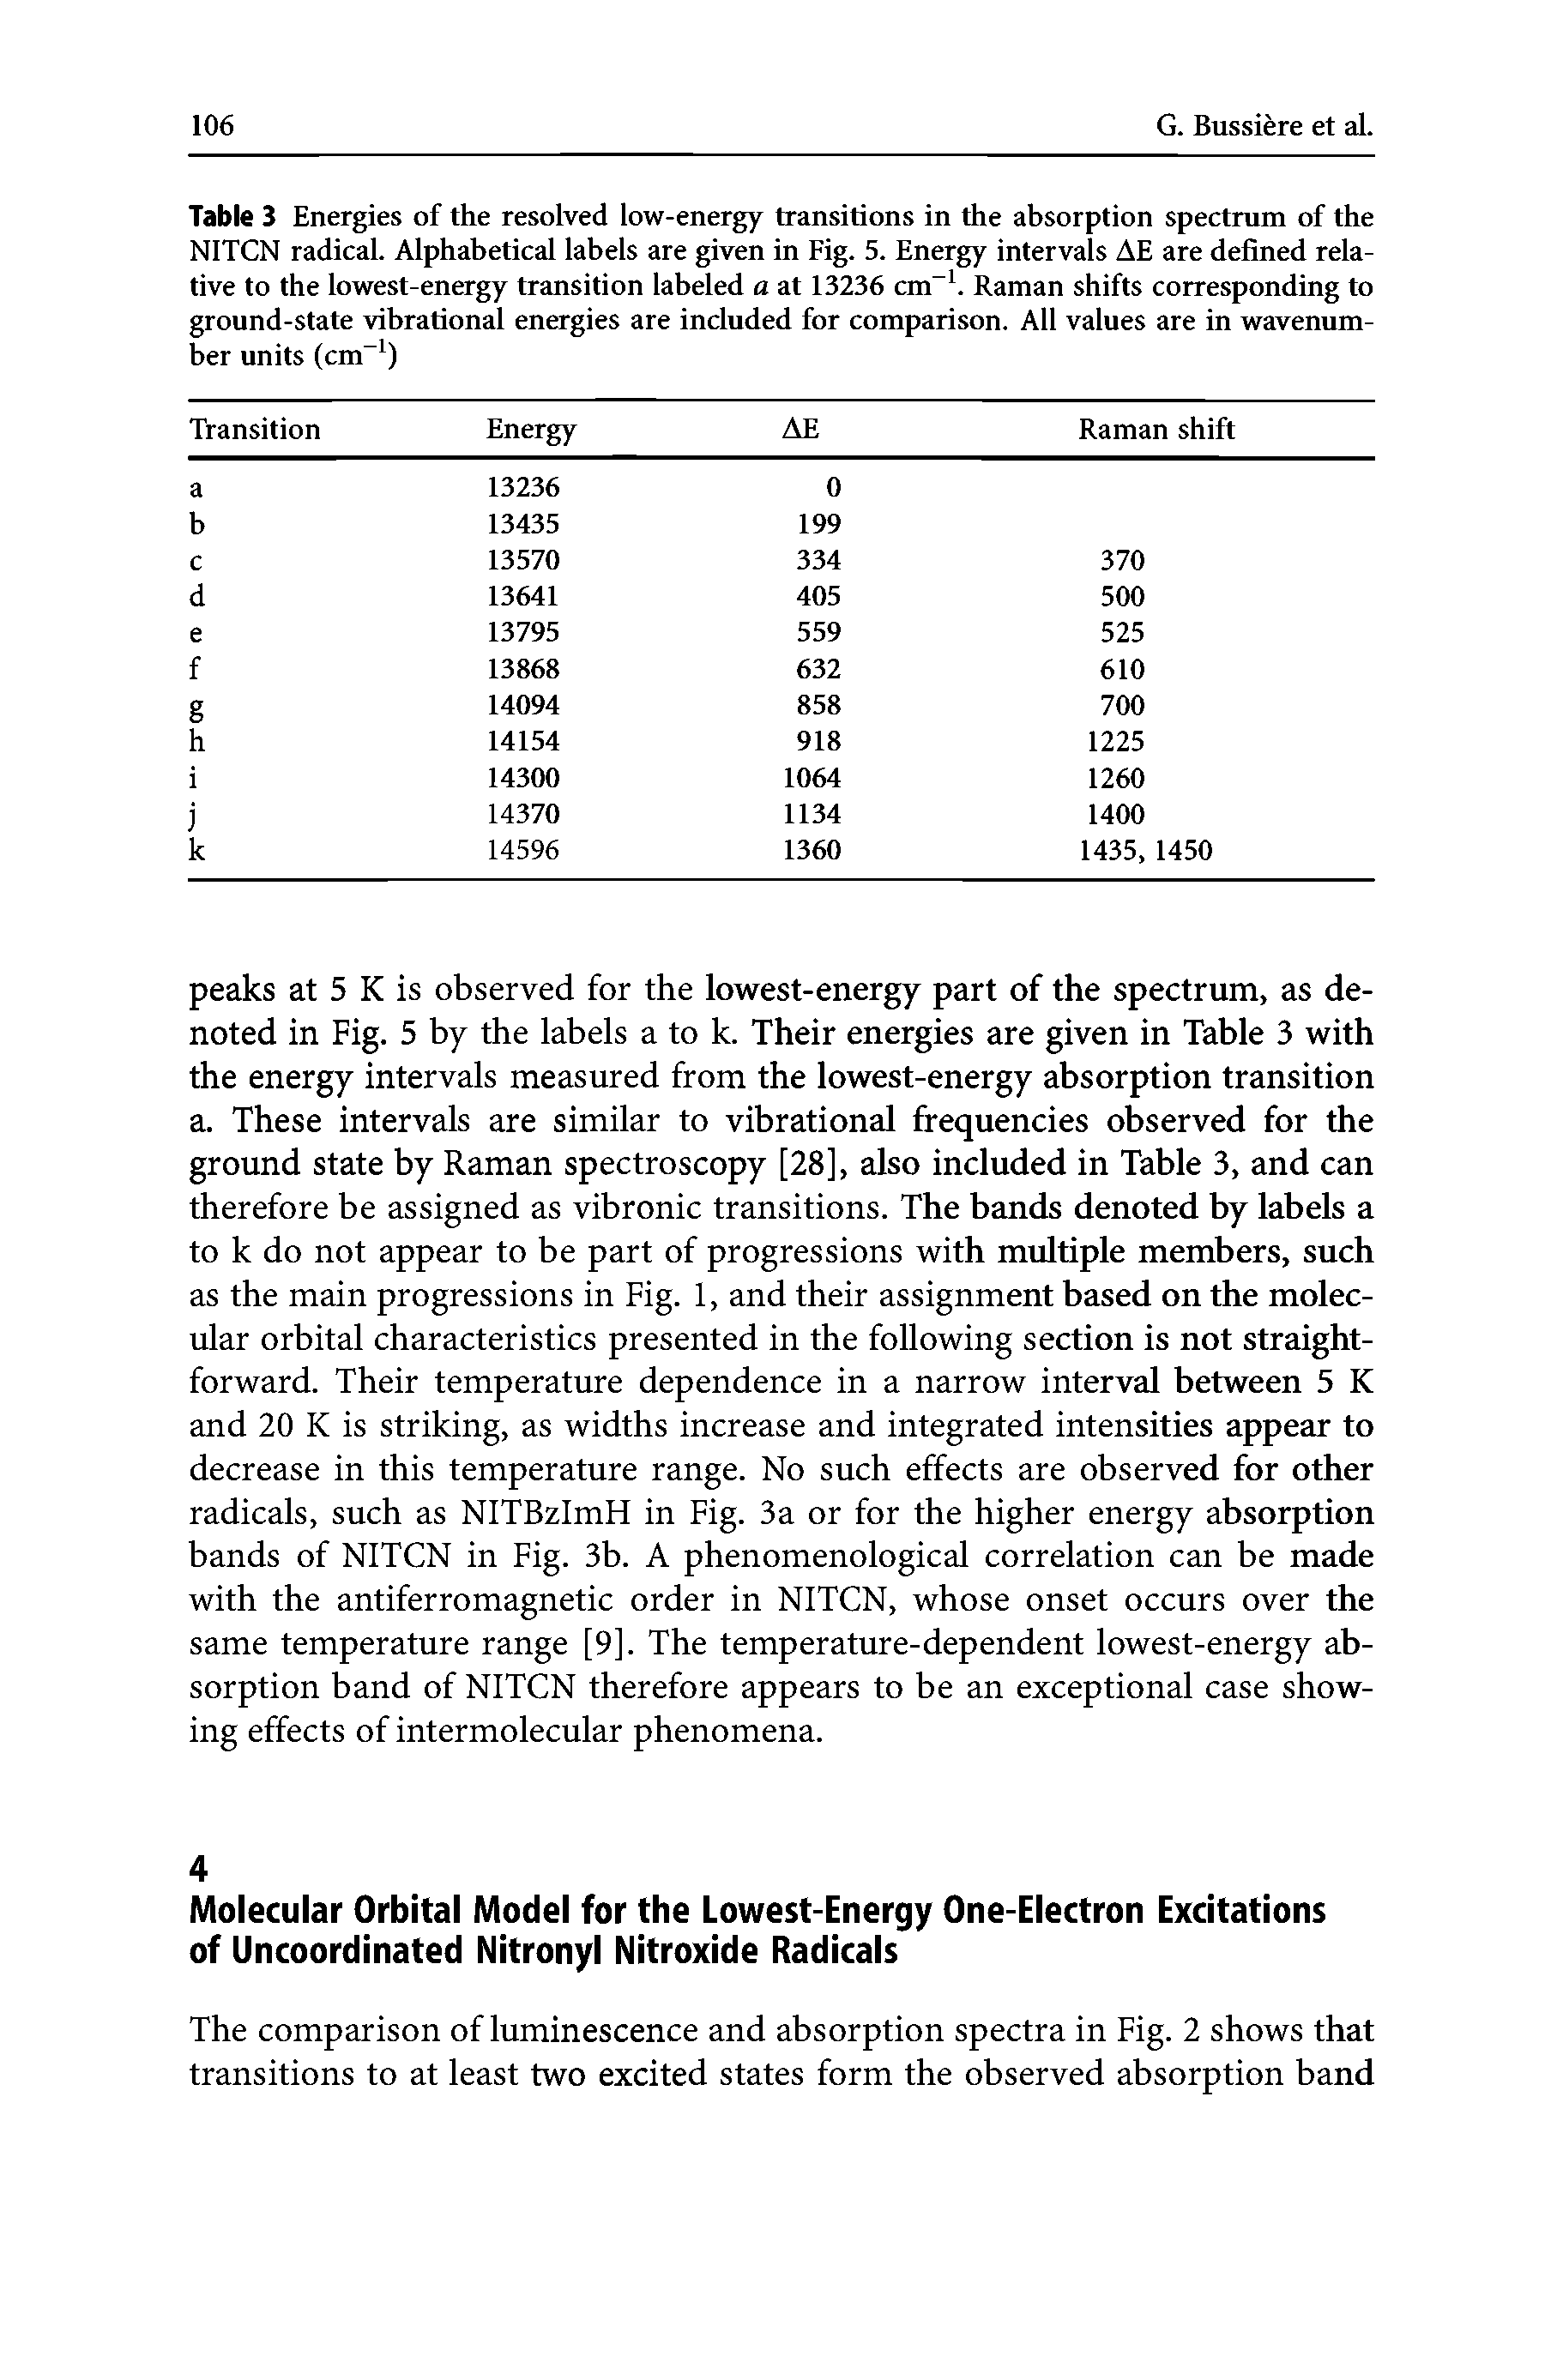 Table 3 Energies of the resolved low-energy transitions in the absorption spectrum of the NITCN radical. Alphabetical labels are given in Fig. 5. Energy intervals AE are defined relative to the lowest-energy transition labeled a at 13236 cm-1. Raman shifts corresponding to ground-state vibrational energies are included for comparison. All values are in wavenumber units (cm-1)...